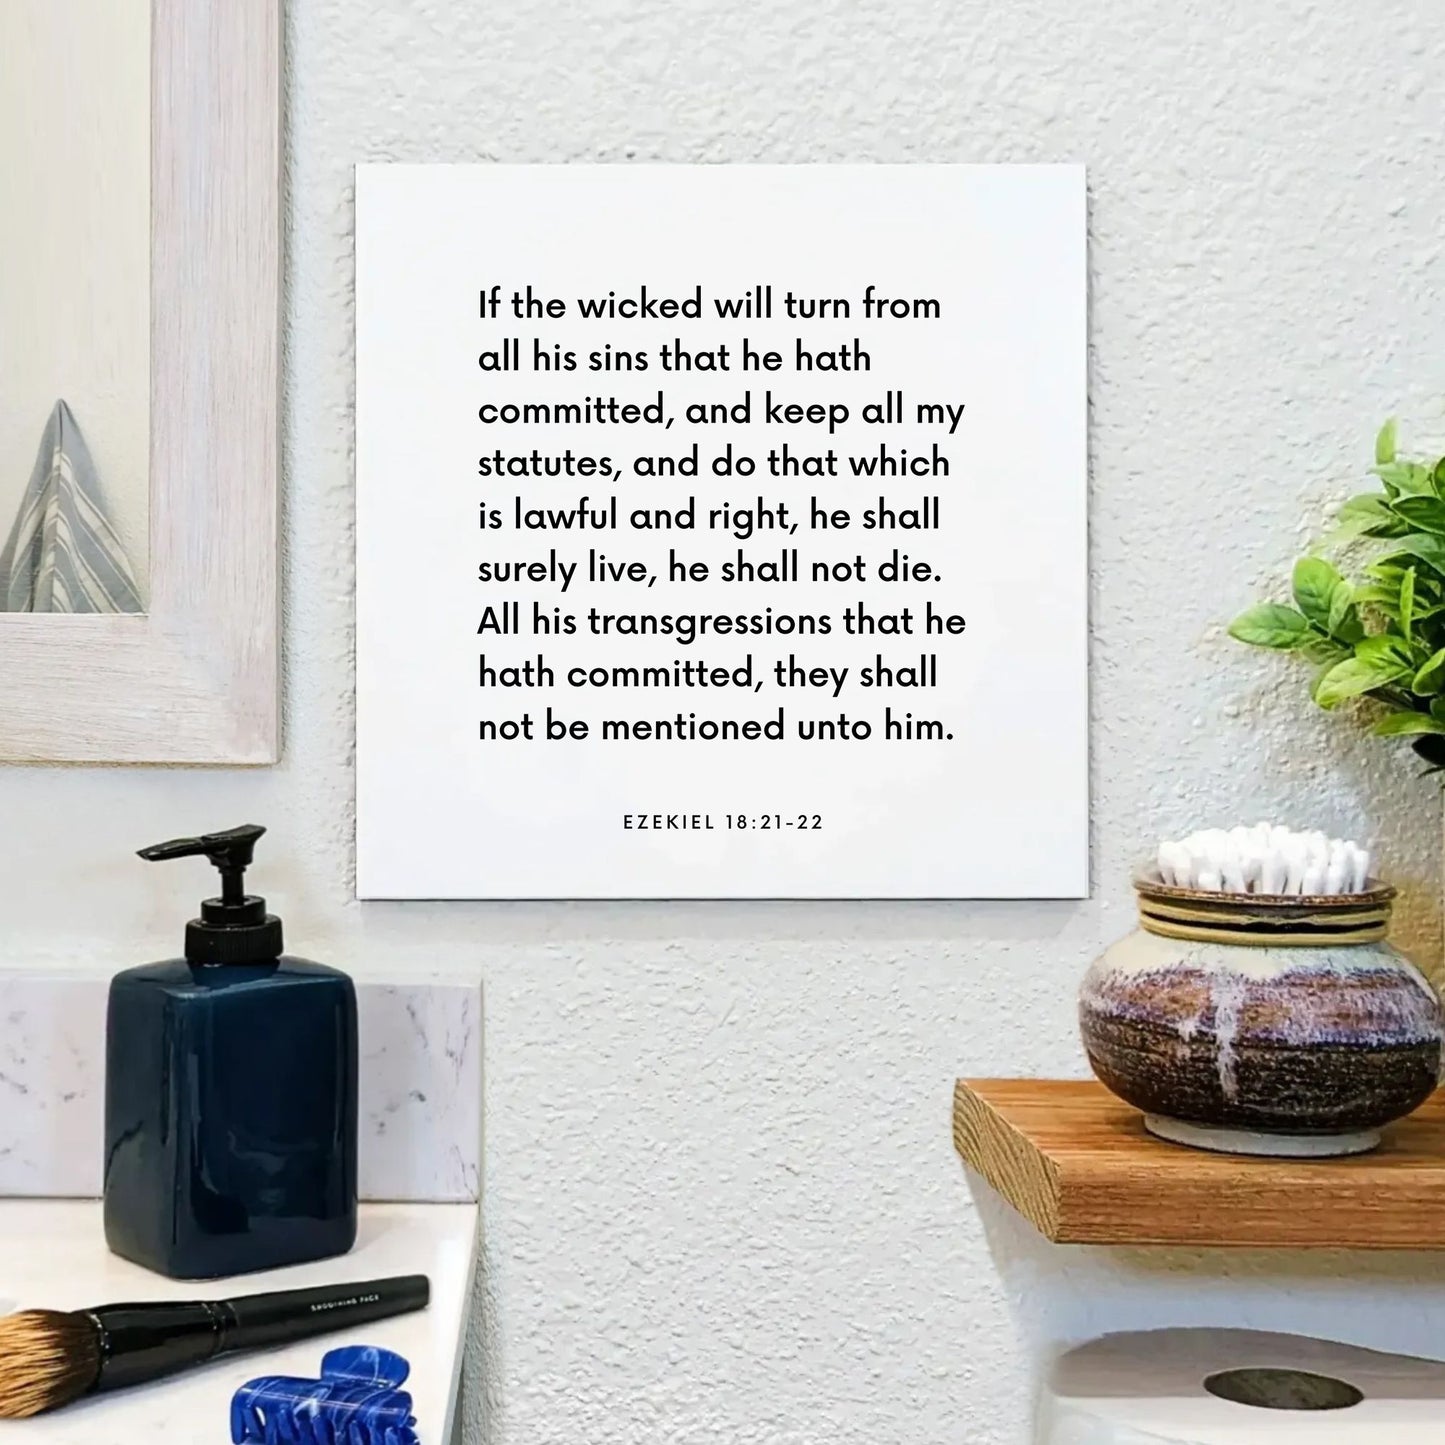 Bathroom mouting of the scripture tile for Ezekiel 18:21-22 - "If the wicked will turn from all his sins"